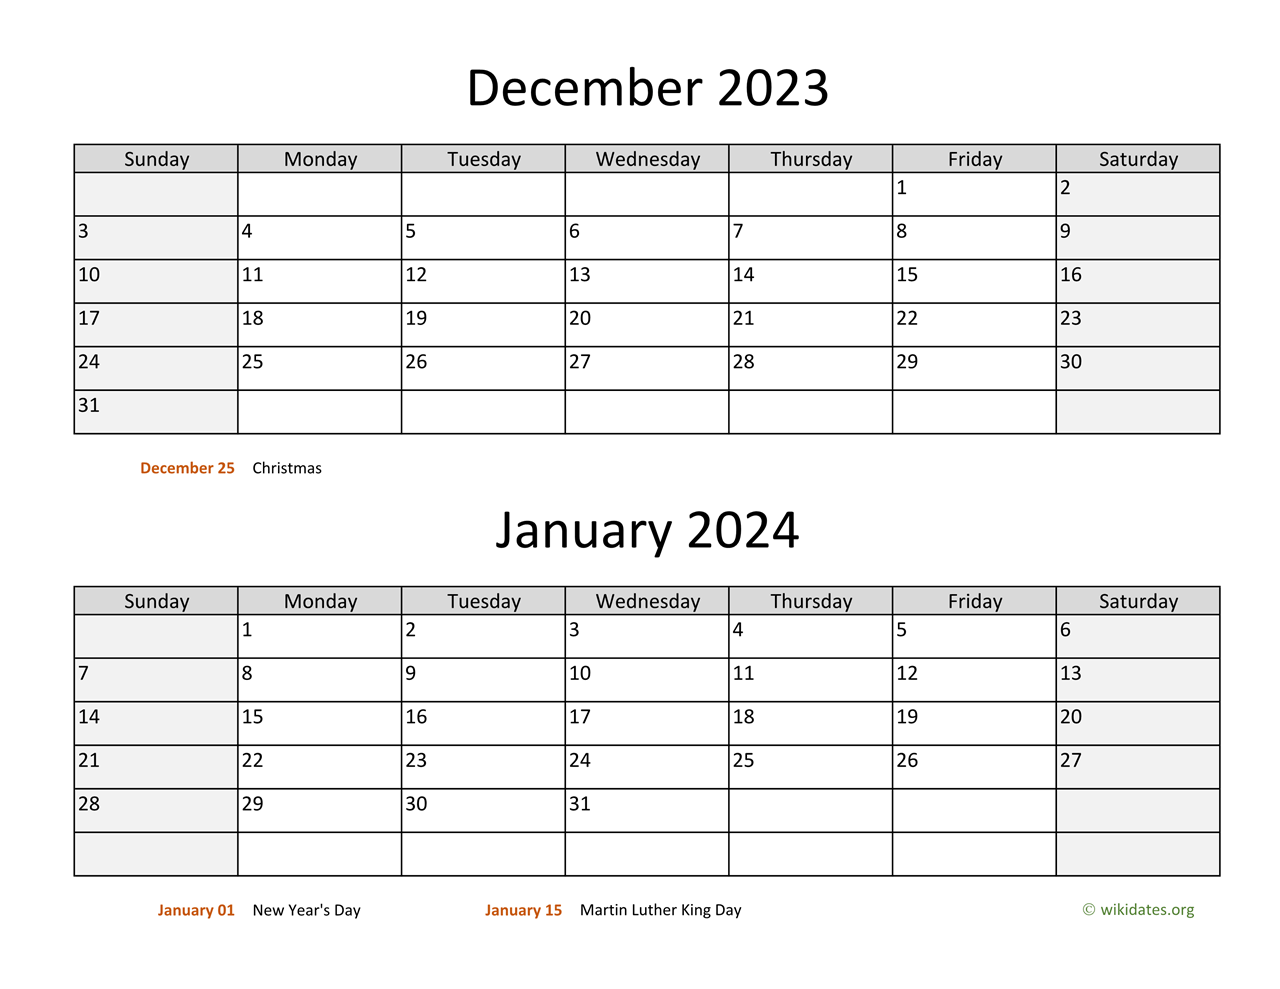 December 2023 And January 2024 Calendar | Wikidates for Printable Calendar December 2023 January 2024